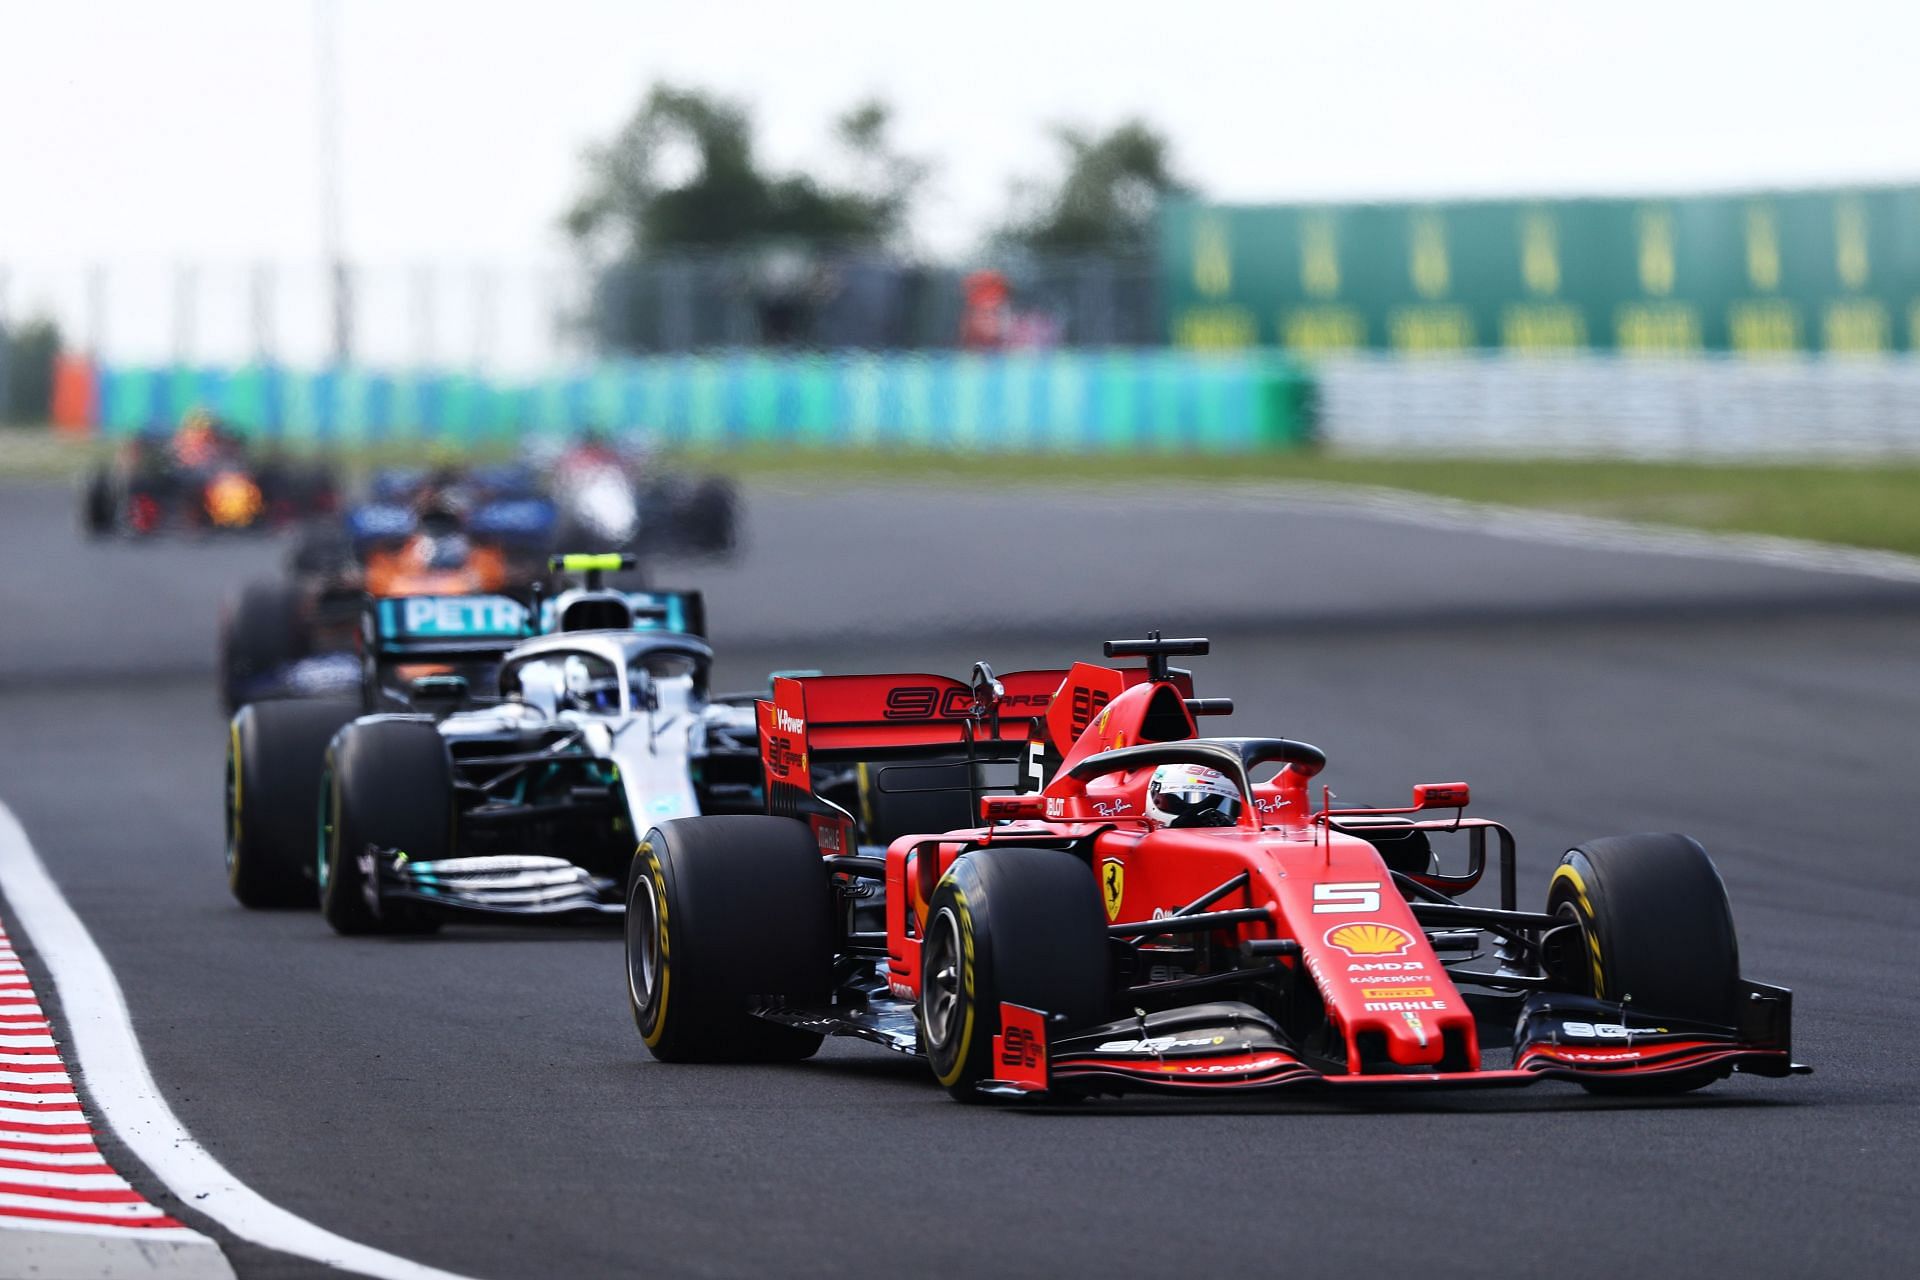 Sebastian Vettel (front) and Valtteri Bottas (back) in action during the 2019 Hungarian Grand Prix (Photo by Lars Baron/Getty Images)